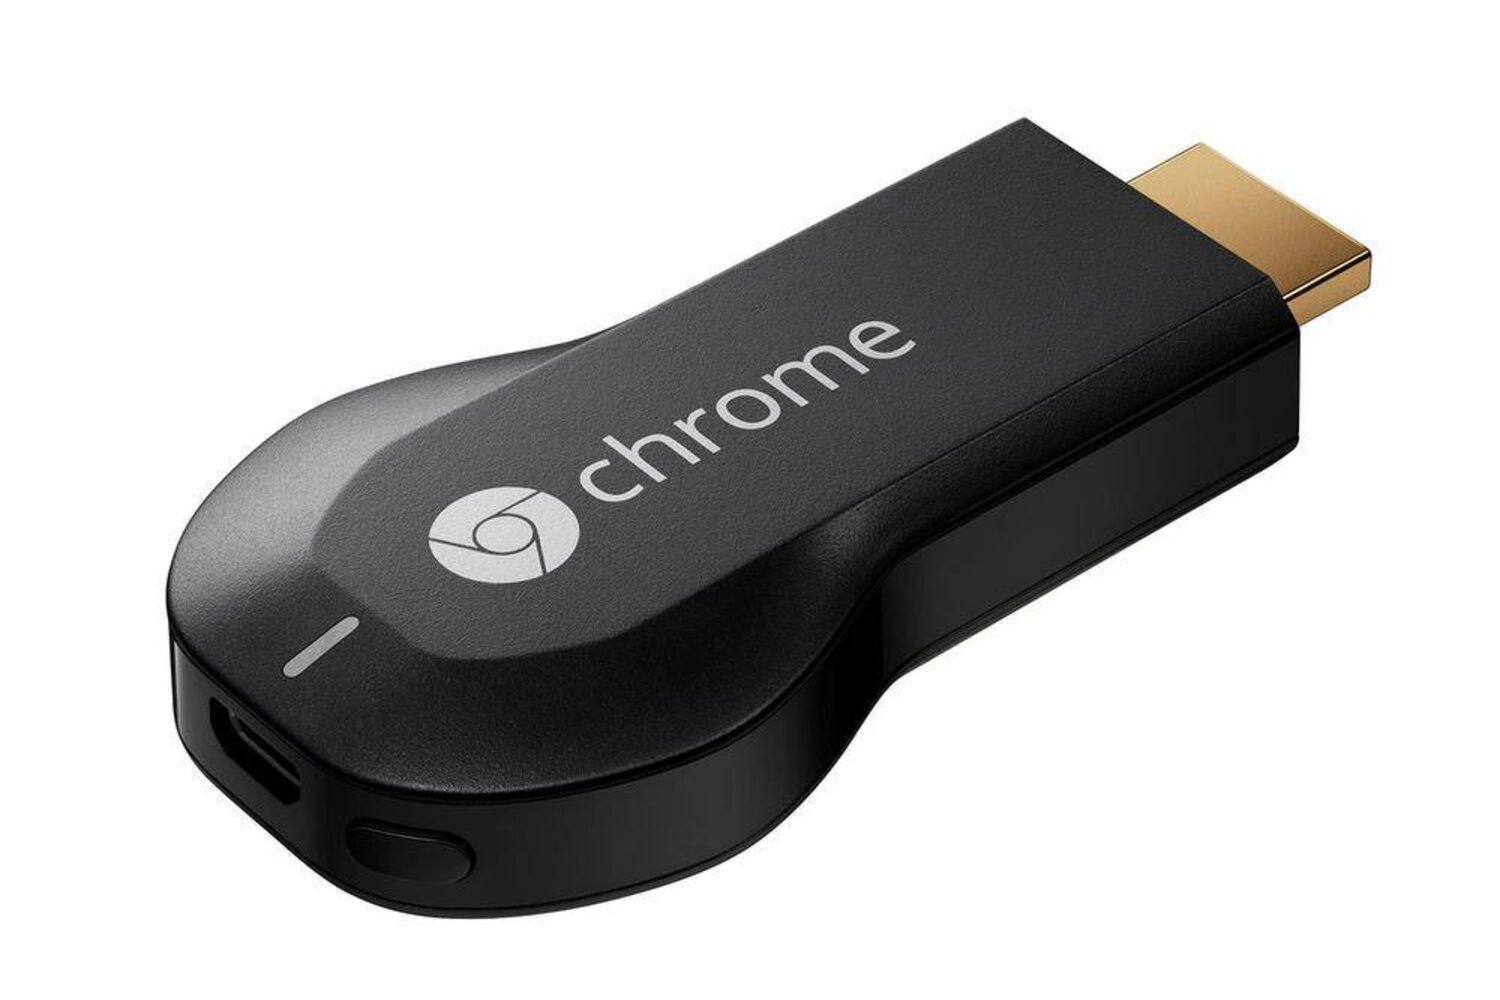 Google Chromecast review: Google's $35 streamer inches on, not